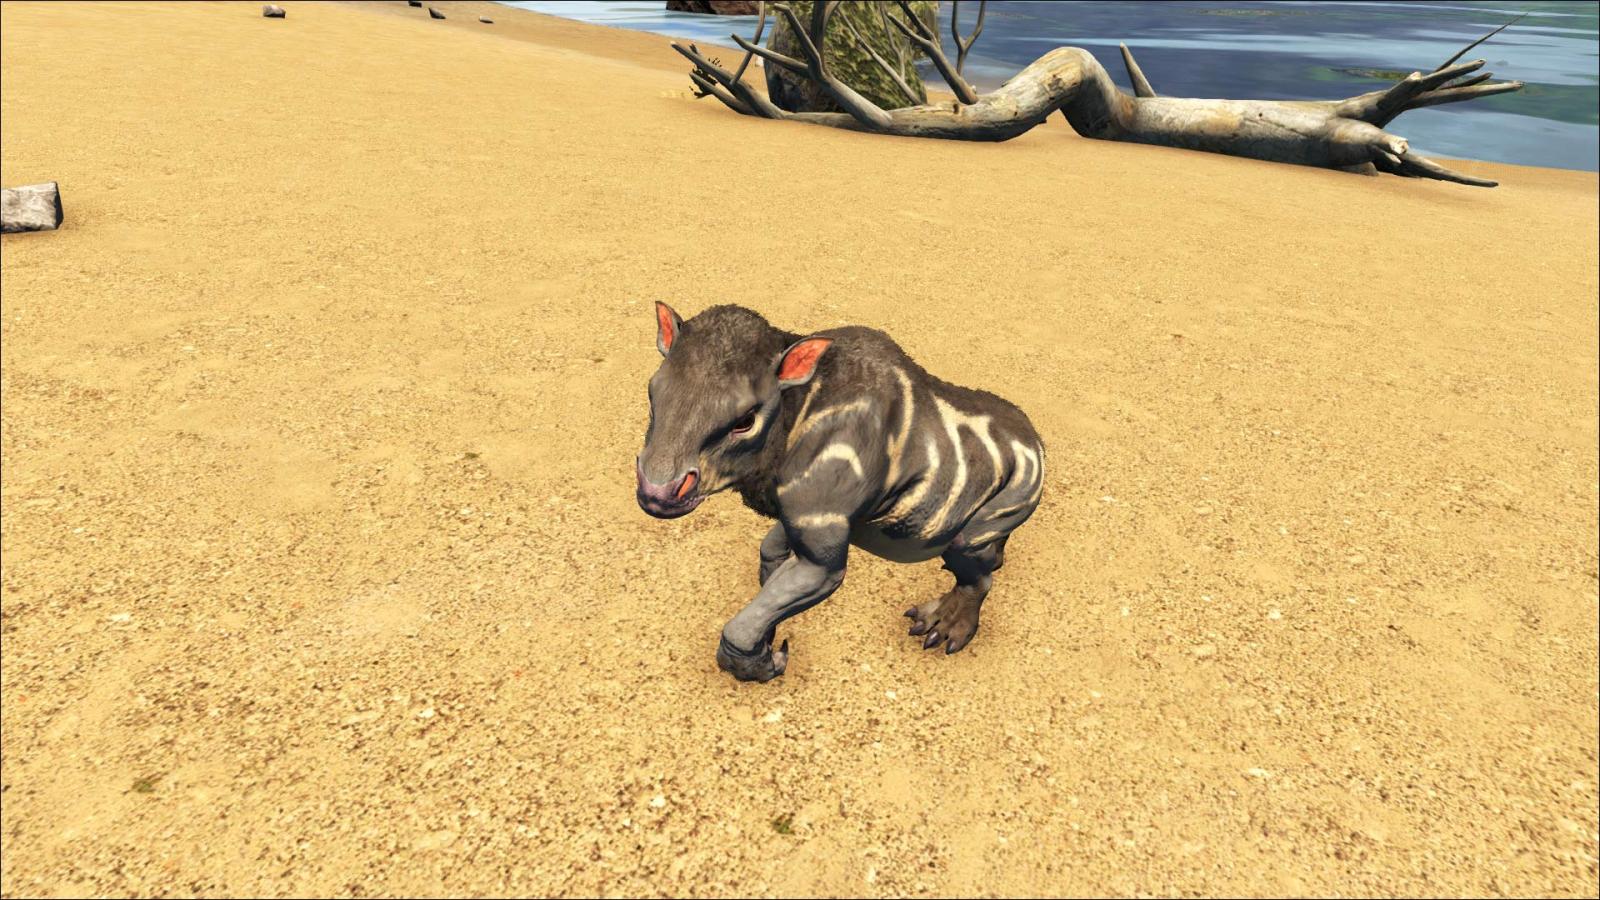 The Babies of ARK